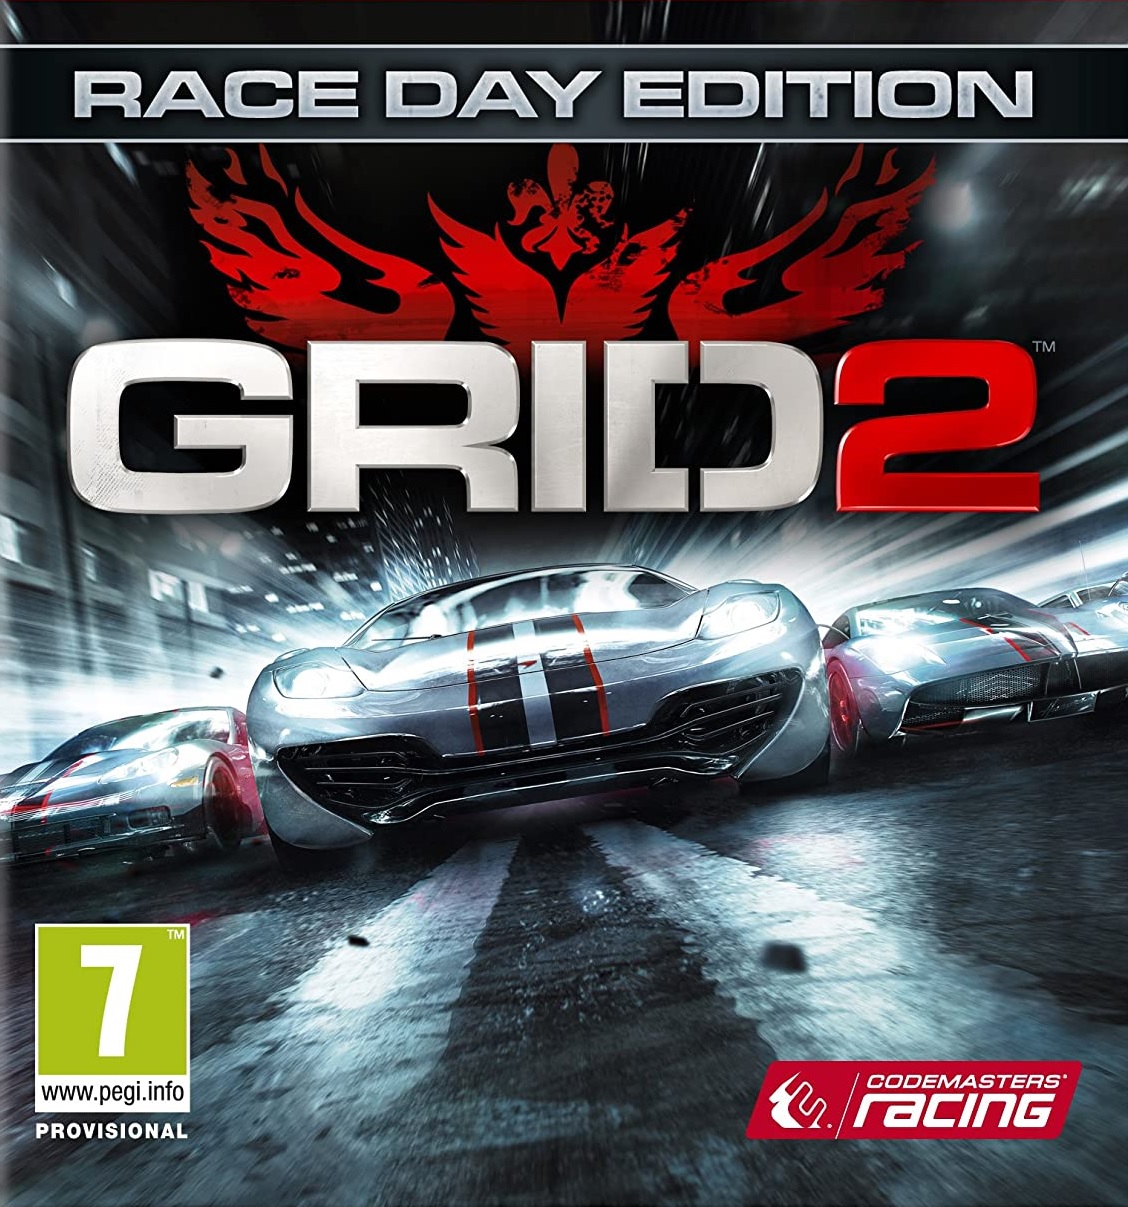 SONY PlayStation 3 PS3 Race Driver: Grid 1 & 2 & Grid Autosport from Japan